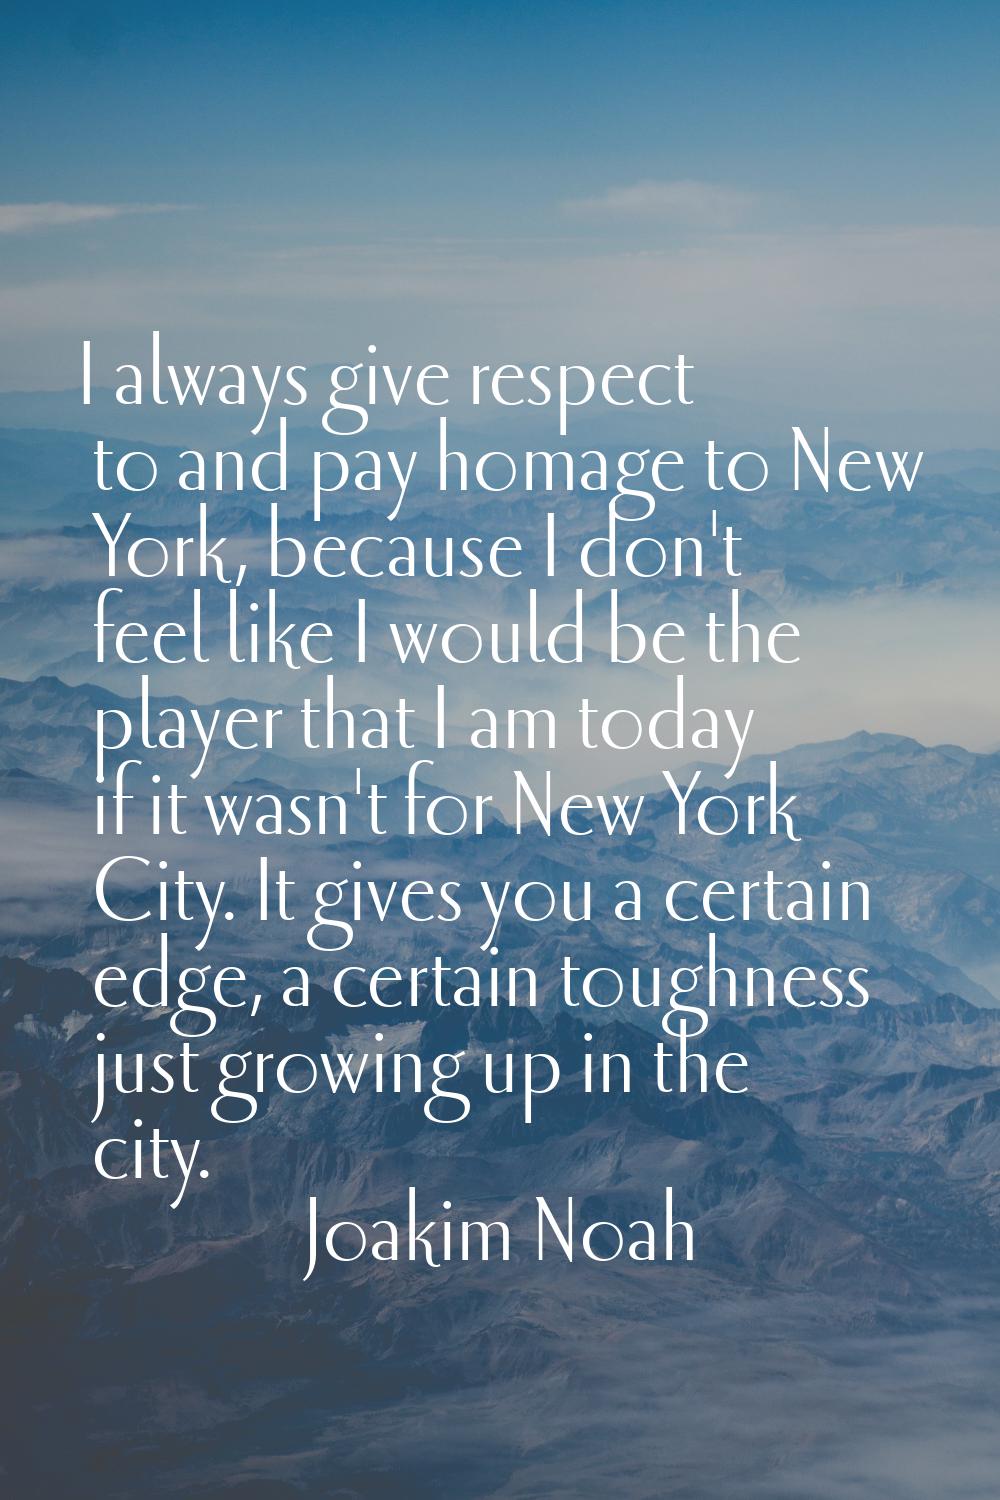 I always give respect to and pay homage to New York, because I don't feel like I would be the playe